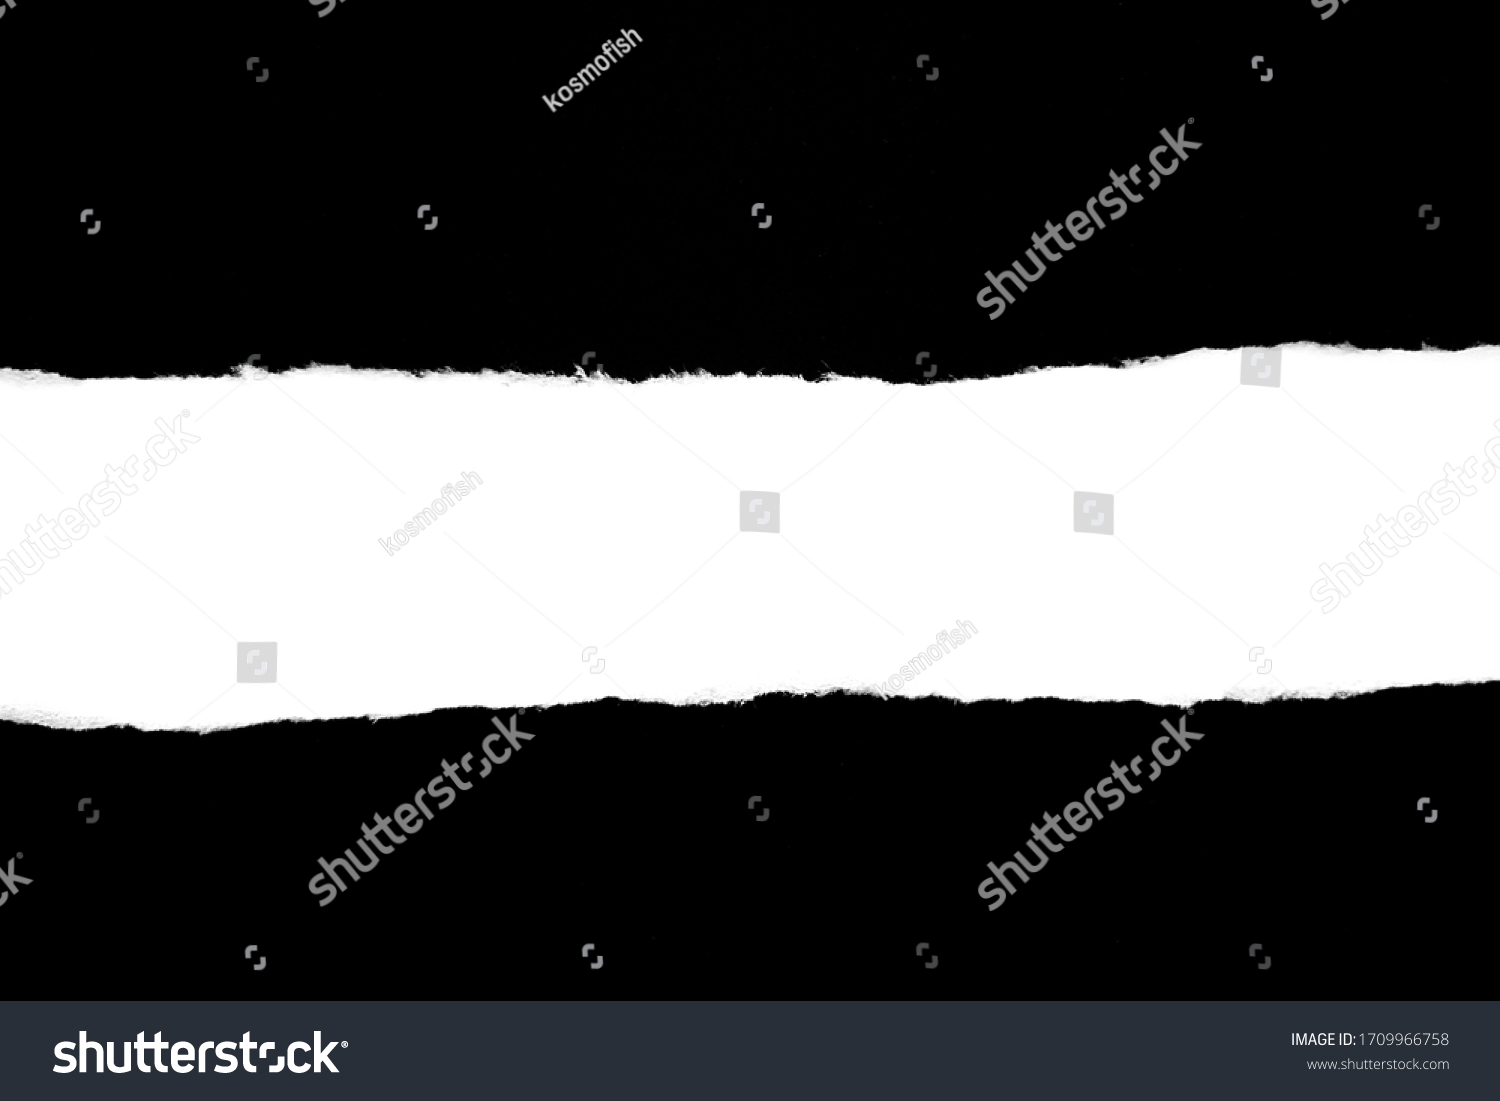 Isolated Rough Torn Rip Paper Cardboard Cut Stripe Piece Sheet Edge. Overlay Surface Texture Background.  #1709966758